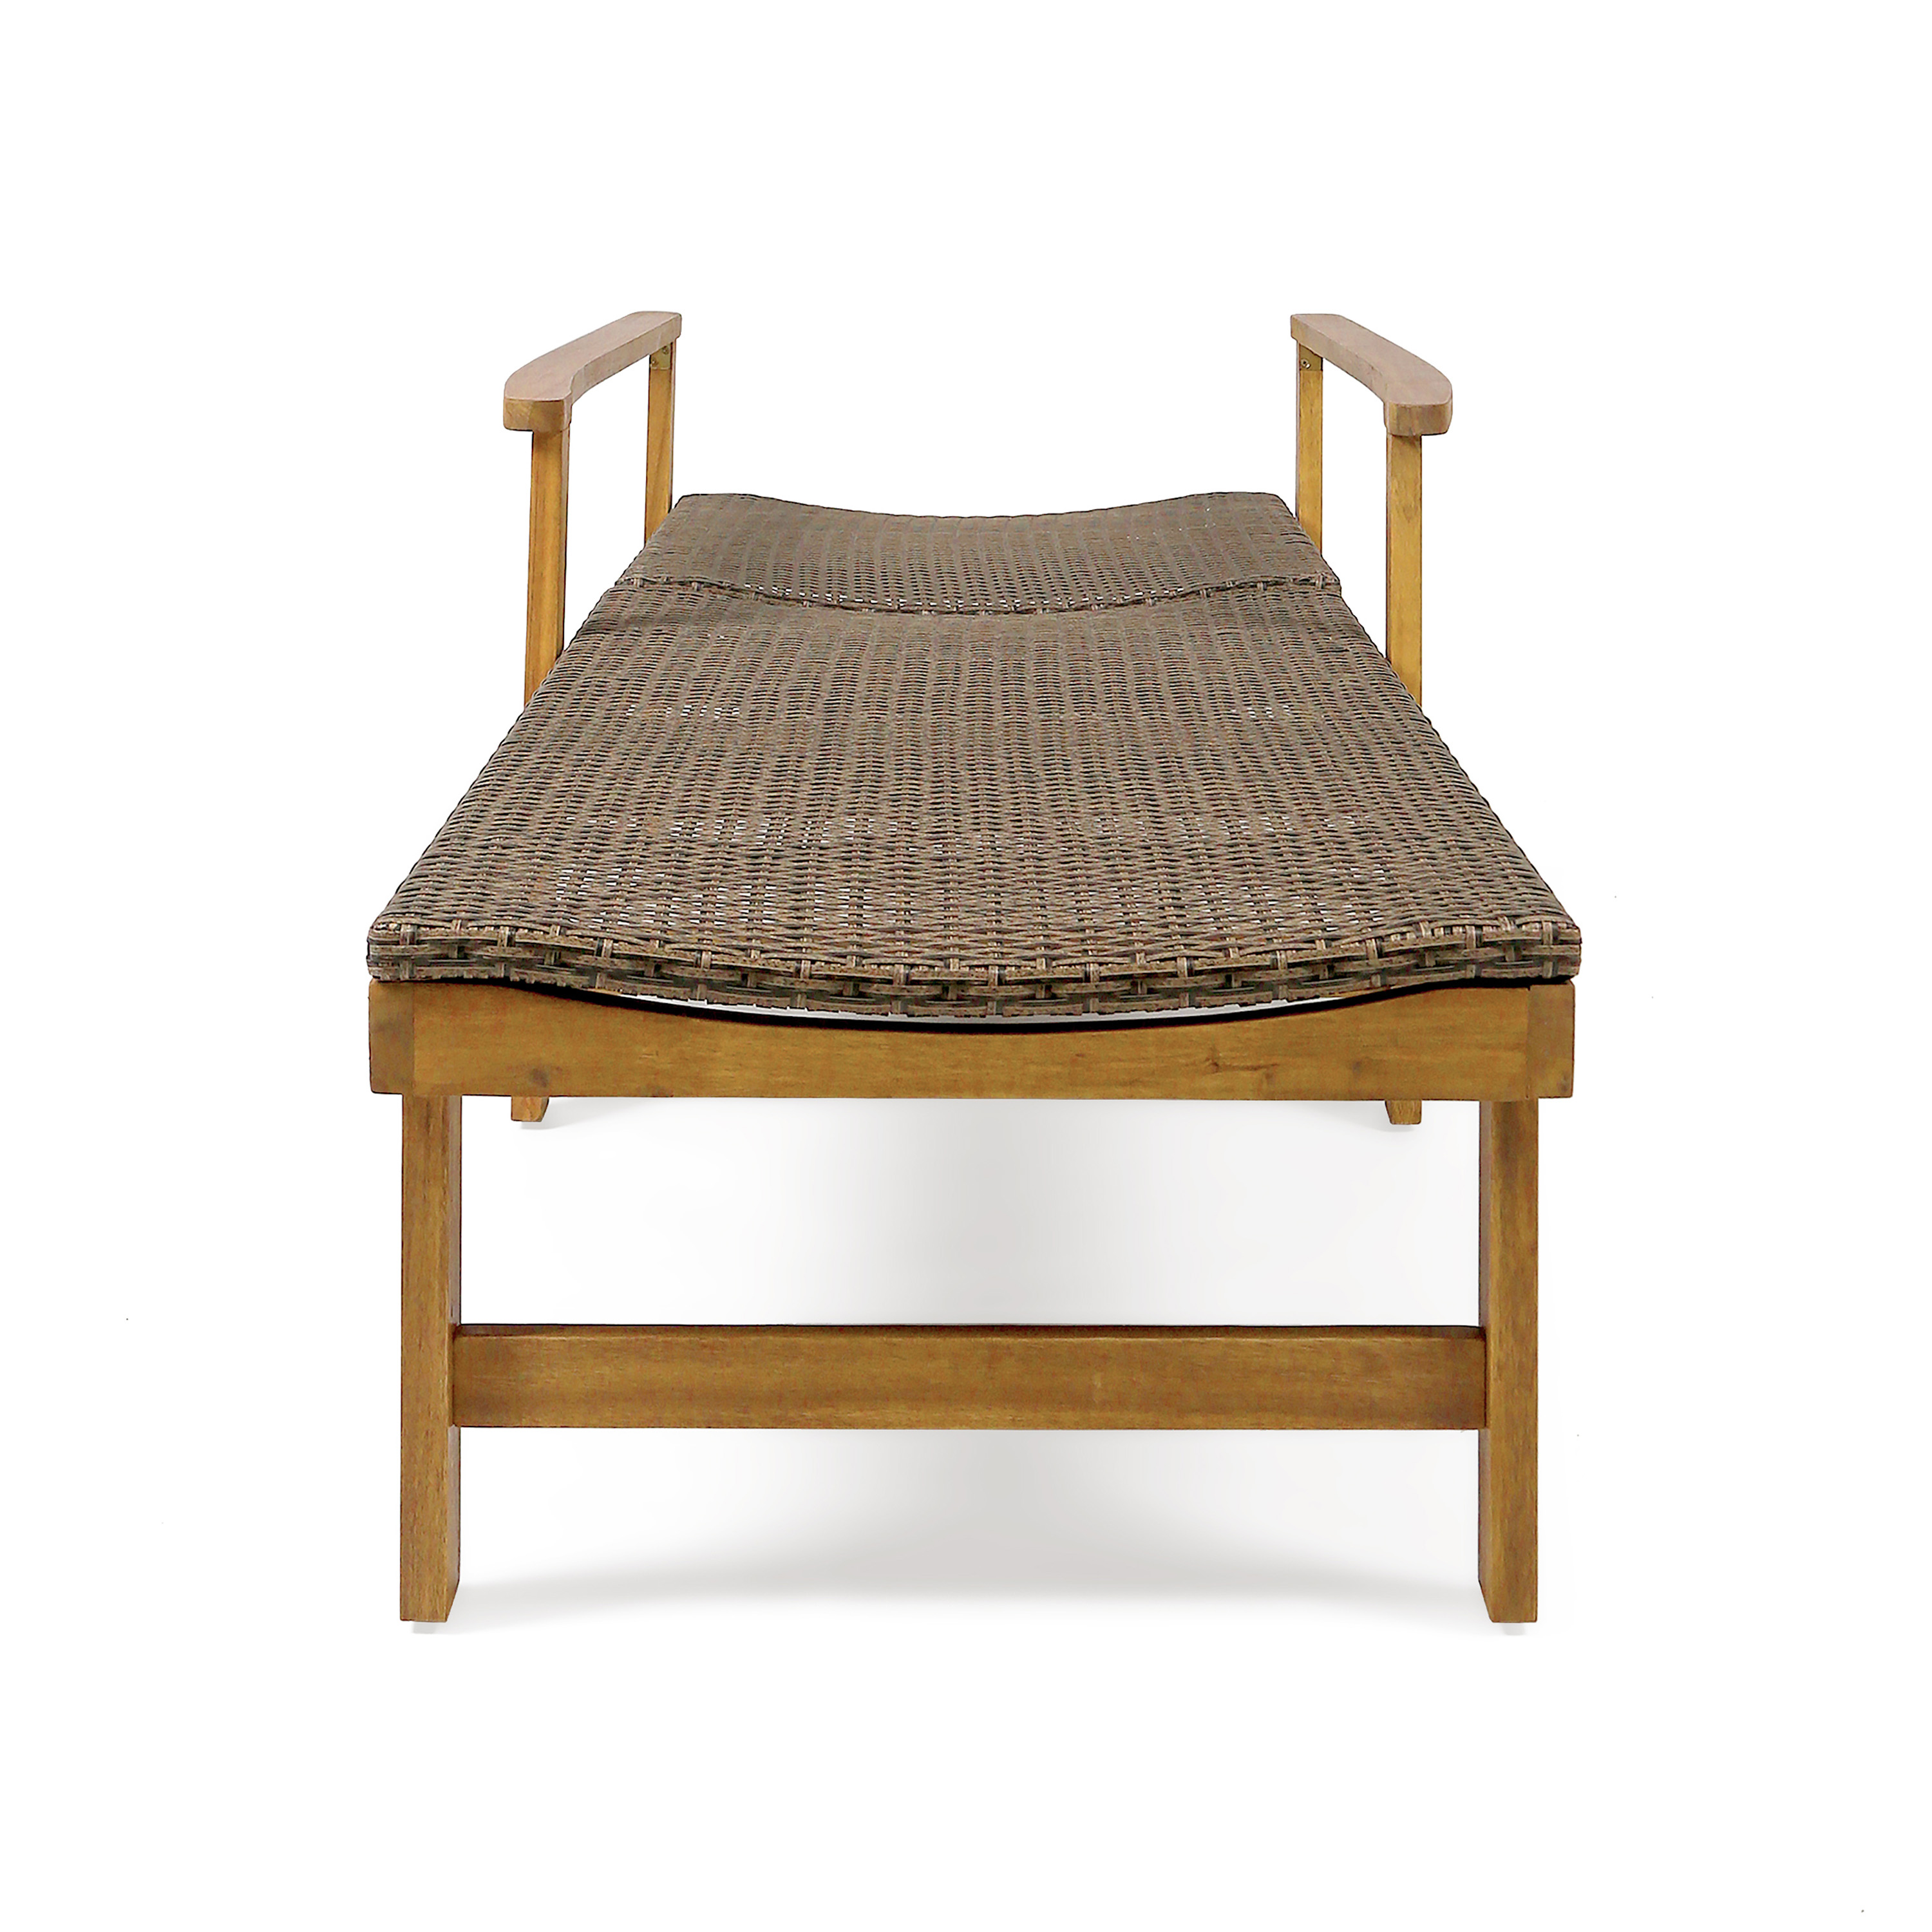 Kyle Outdoor Rustic Natural Acacia Wood Chaise Lounge with Wicker Seat, Natural Brown and Mixed Mocha - image 1 of 10